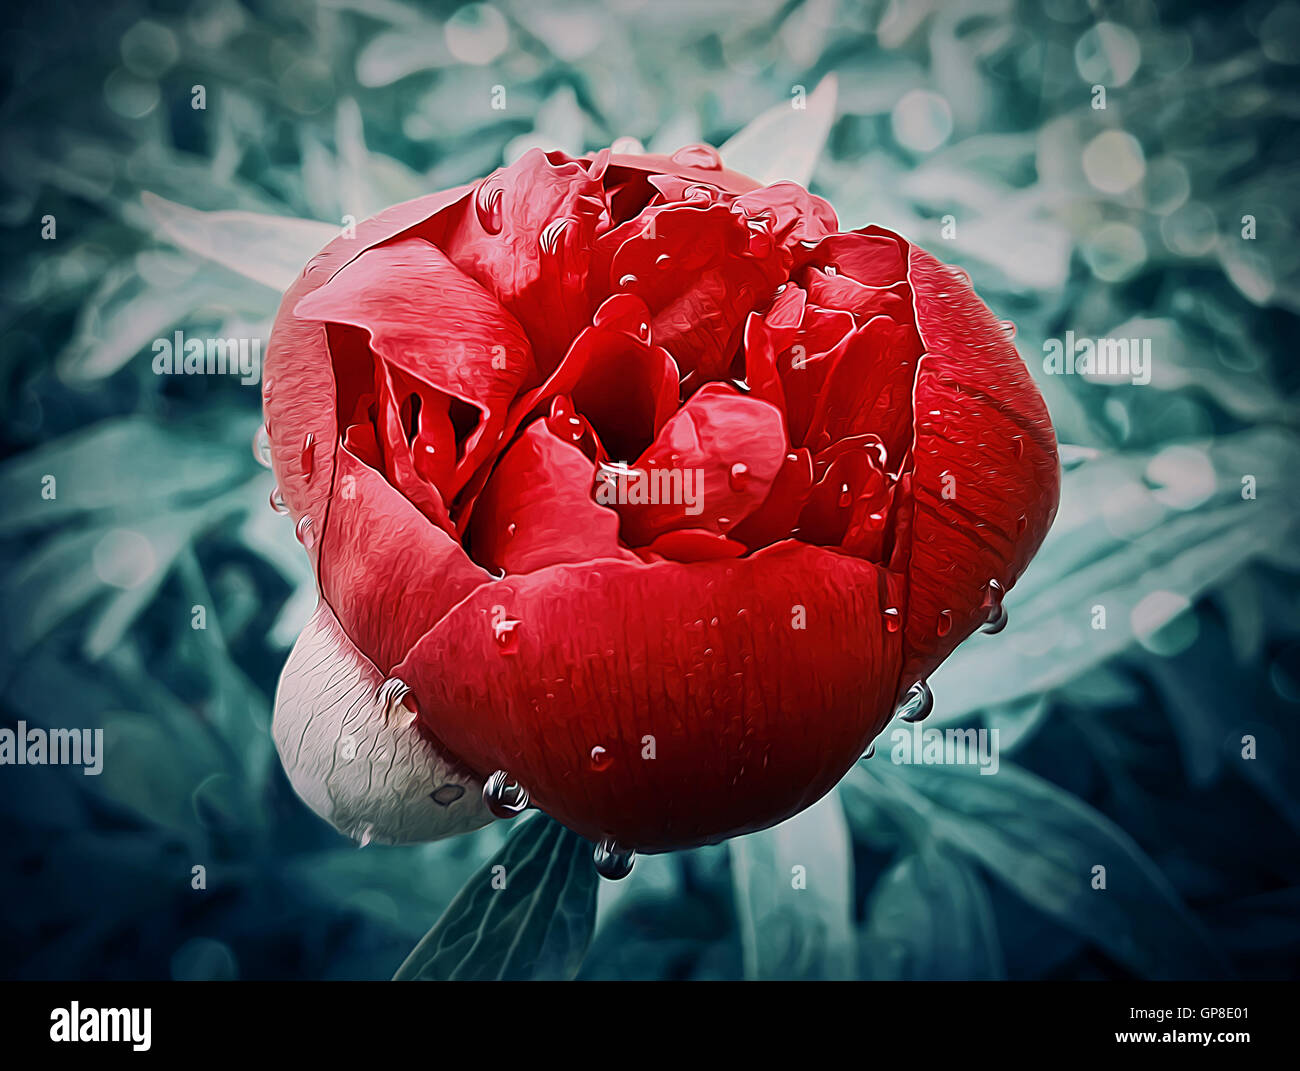 Abstract illustration of a single, red peony flower with deo water drops on petals Stock Photo